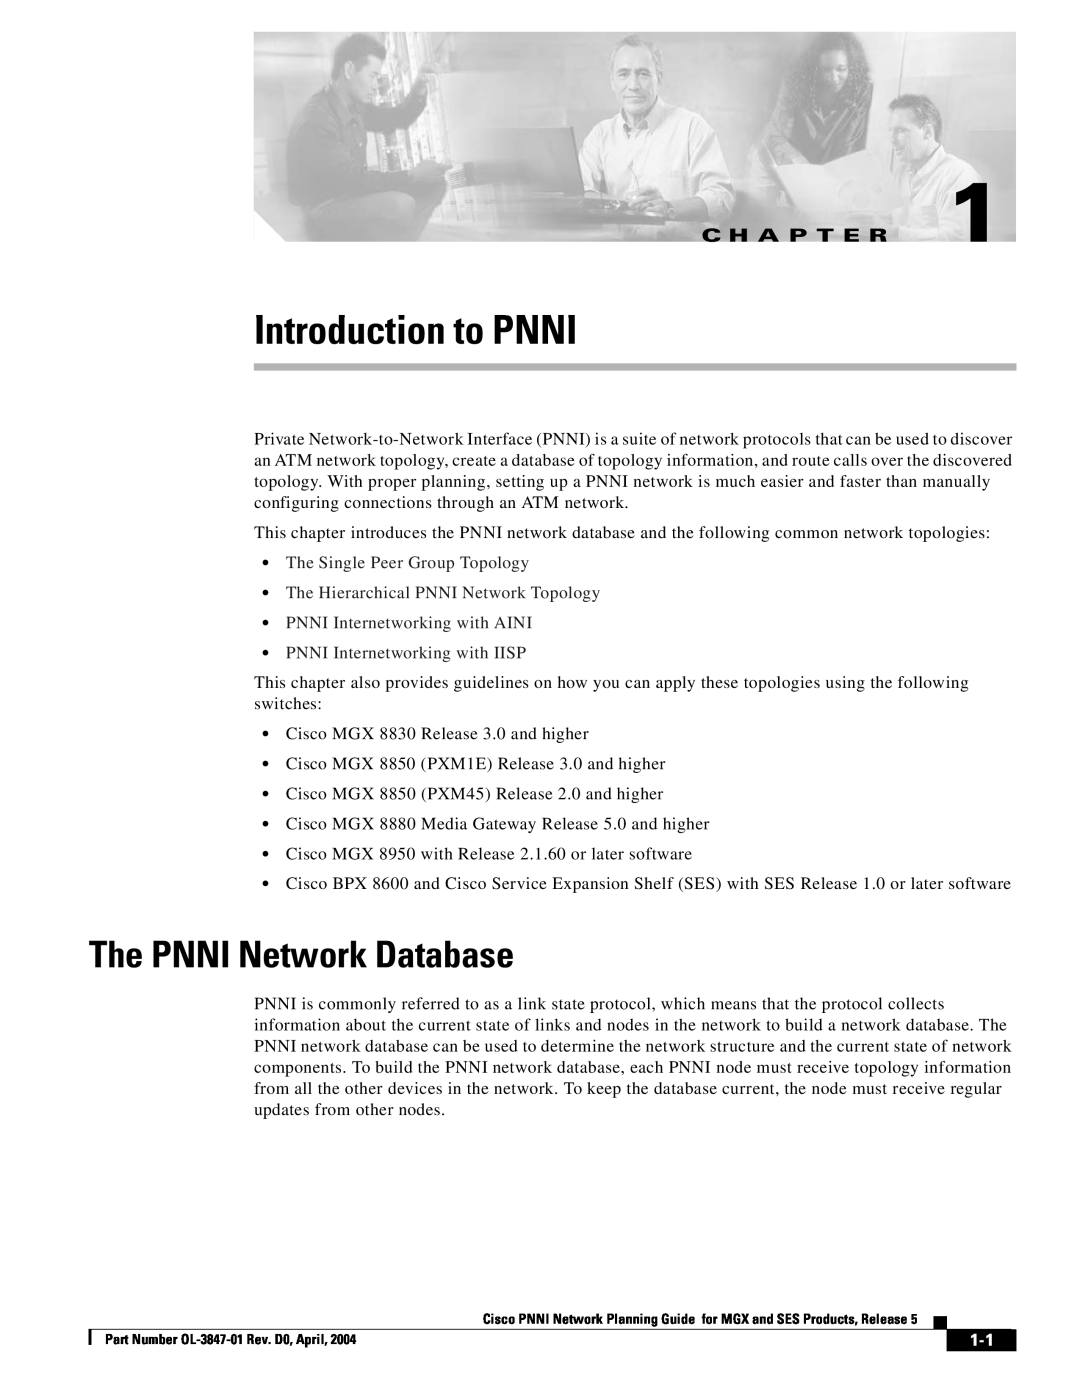 Cisco Systems Network Router manual Introduction to PNNI, The PNNI Network Database, C H A P T E R 